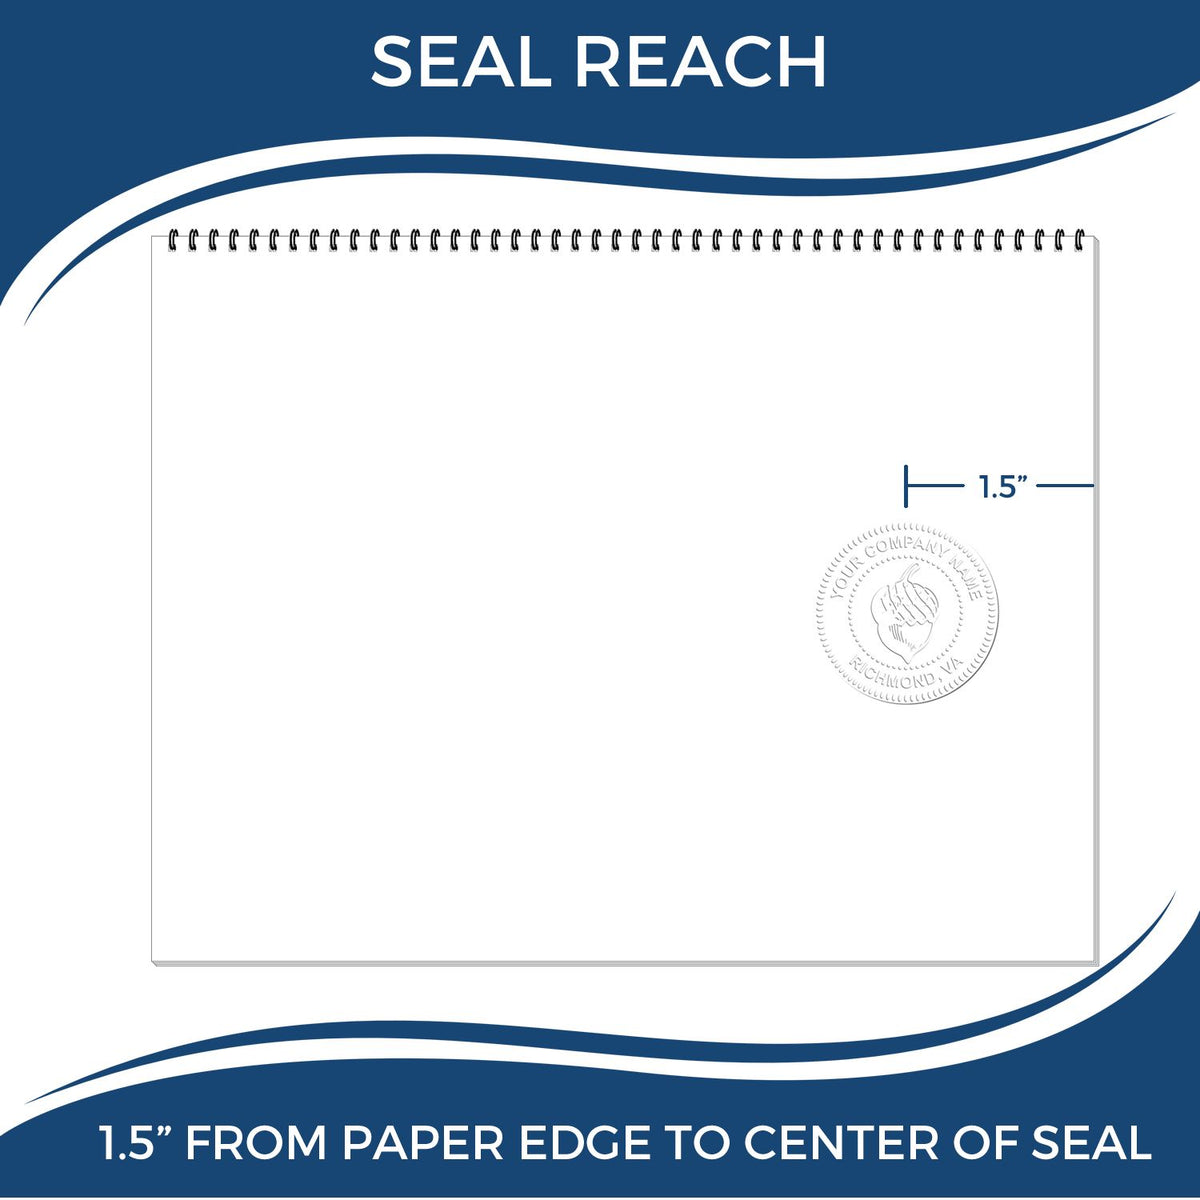 An infographic showing the seal reach which is represented by a ruler and a miniature seal image of the Gift Minnesota Architect Seal